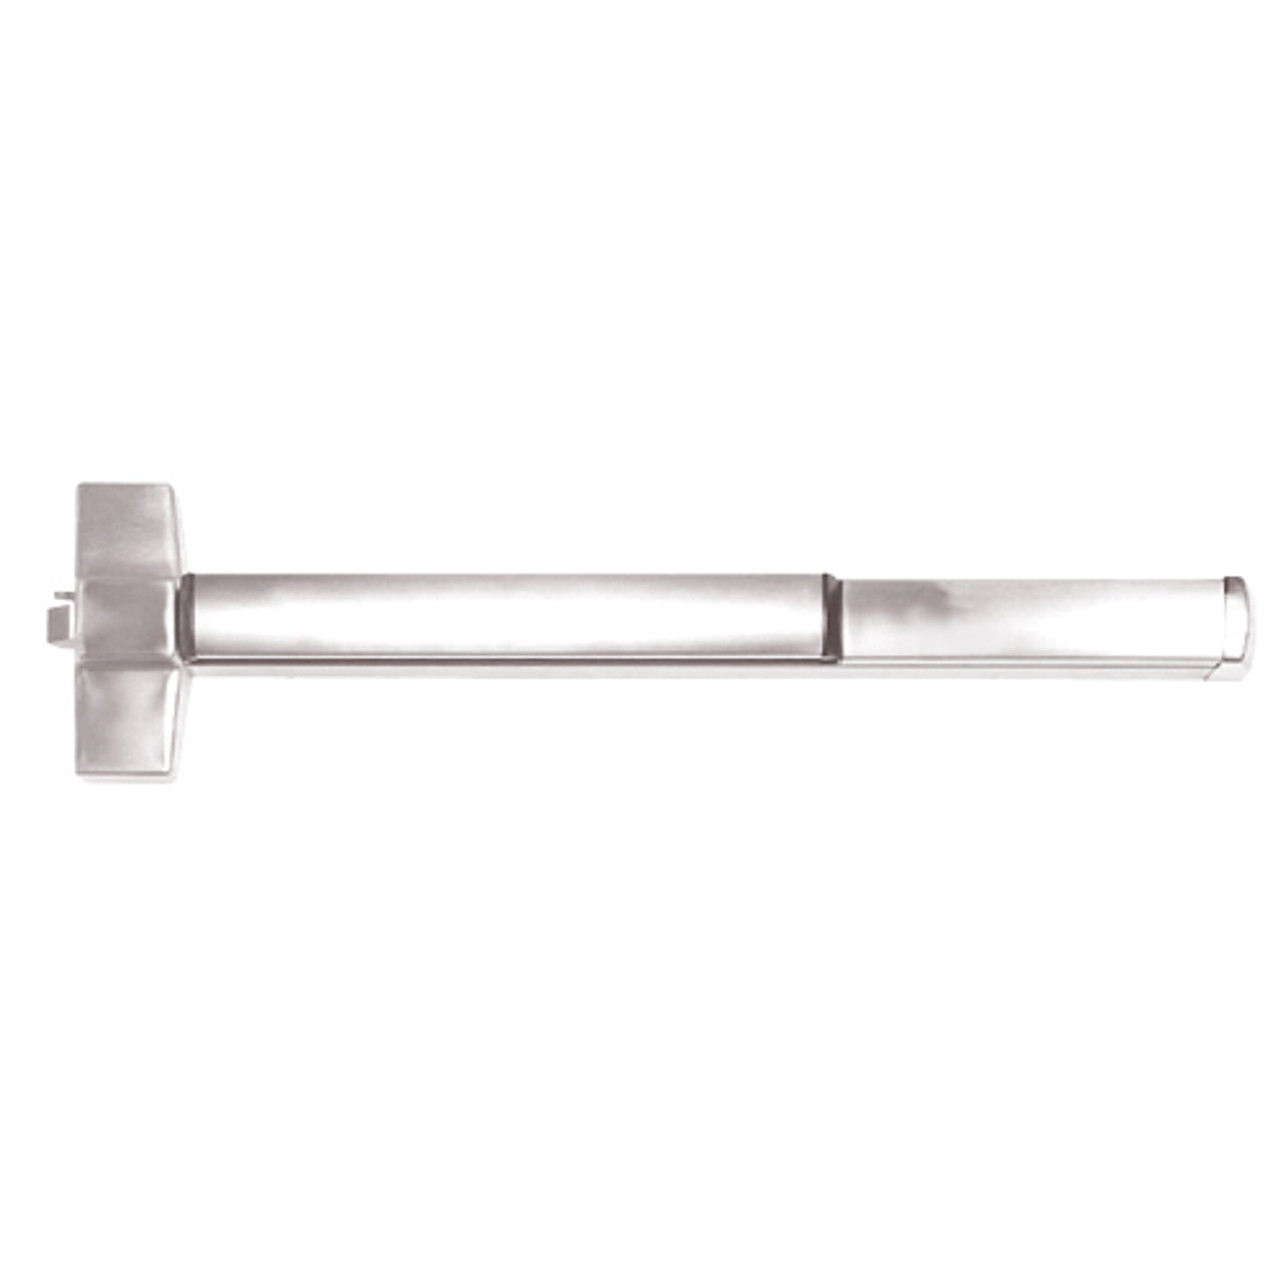 ED5200A-629 Corbin ED5200 Series Fire Rated Rim Exit Device in Bright Stainless Steel Finish